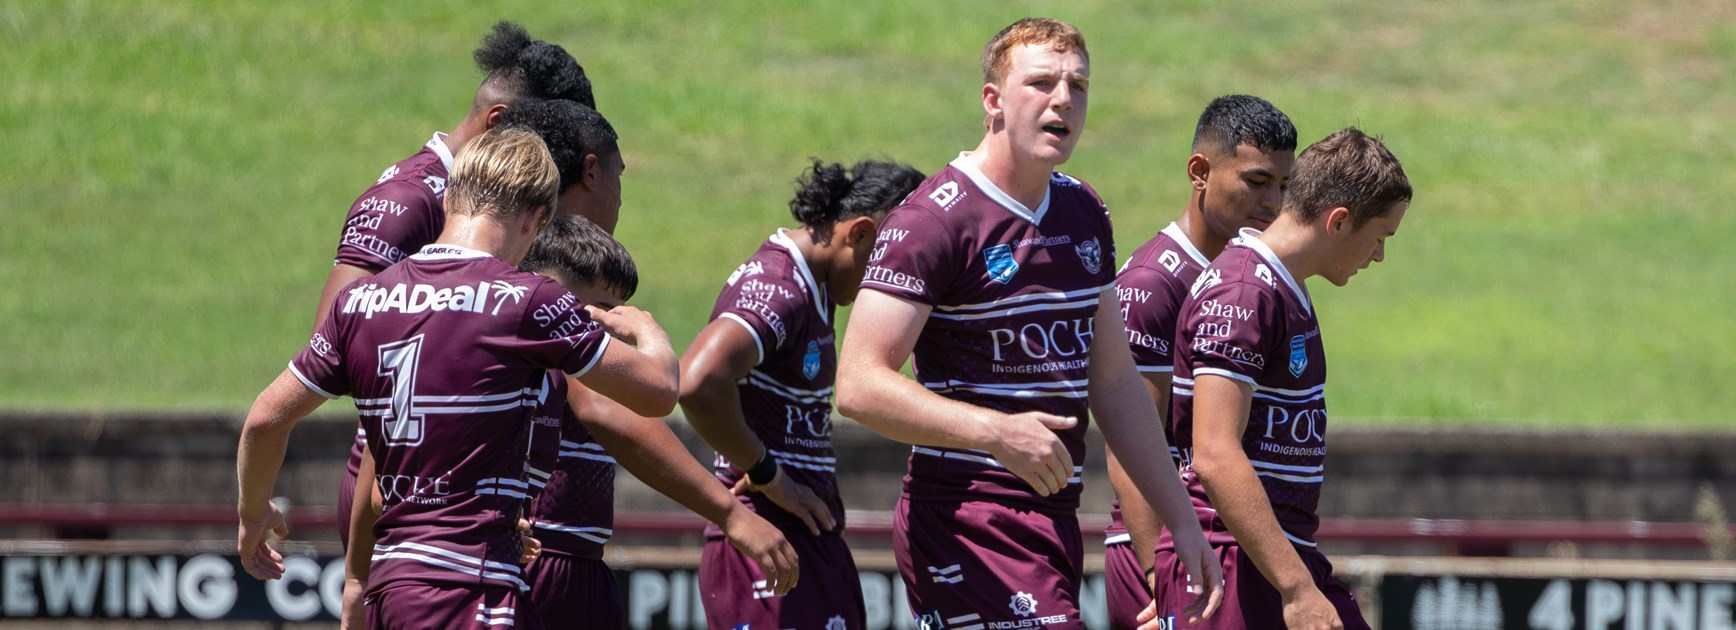 Host families required for Sea Eagles Junior Rep players